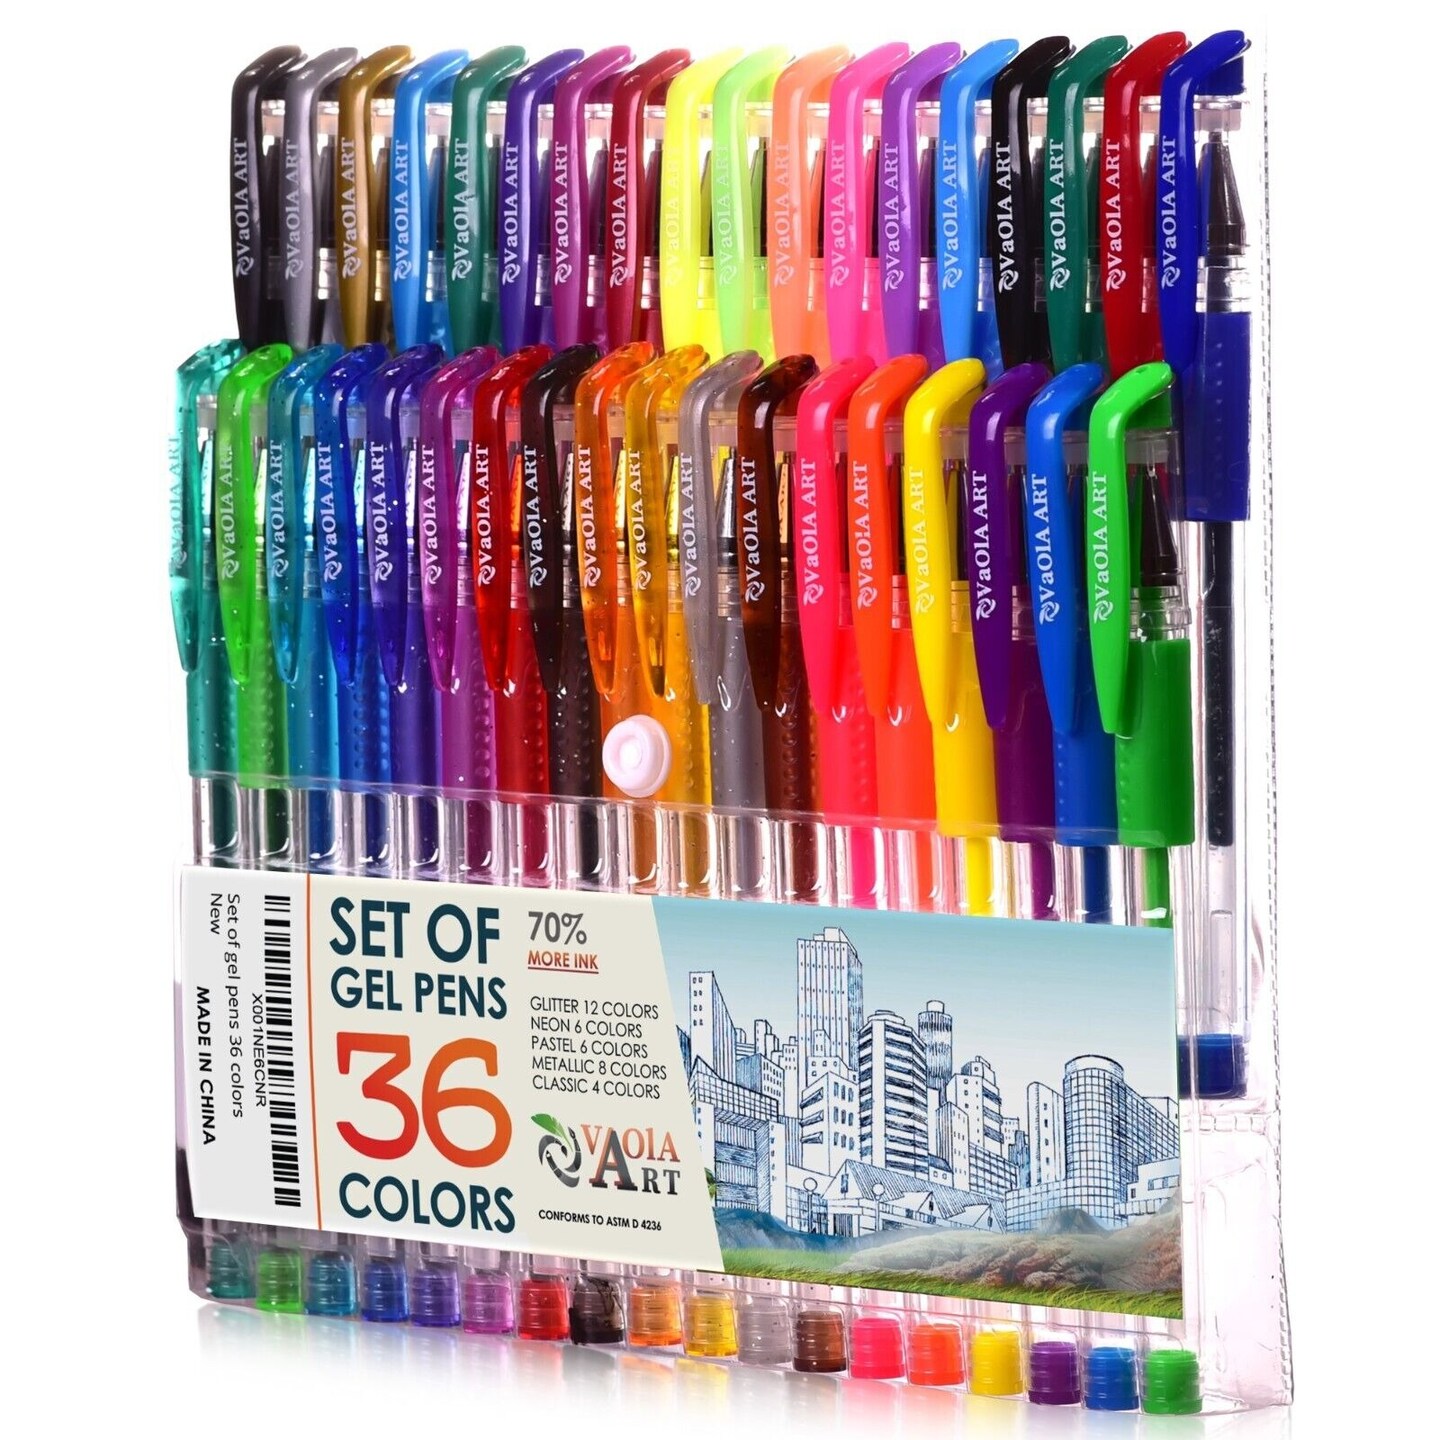 36 Multicolored Gel Pens for Adult Coloring